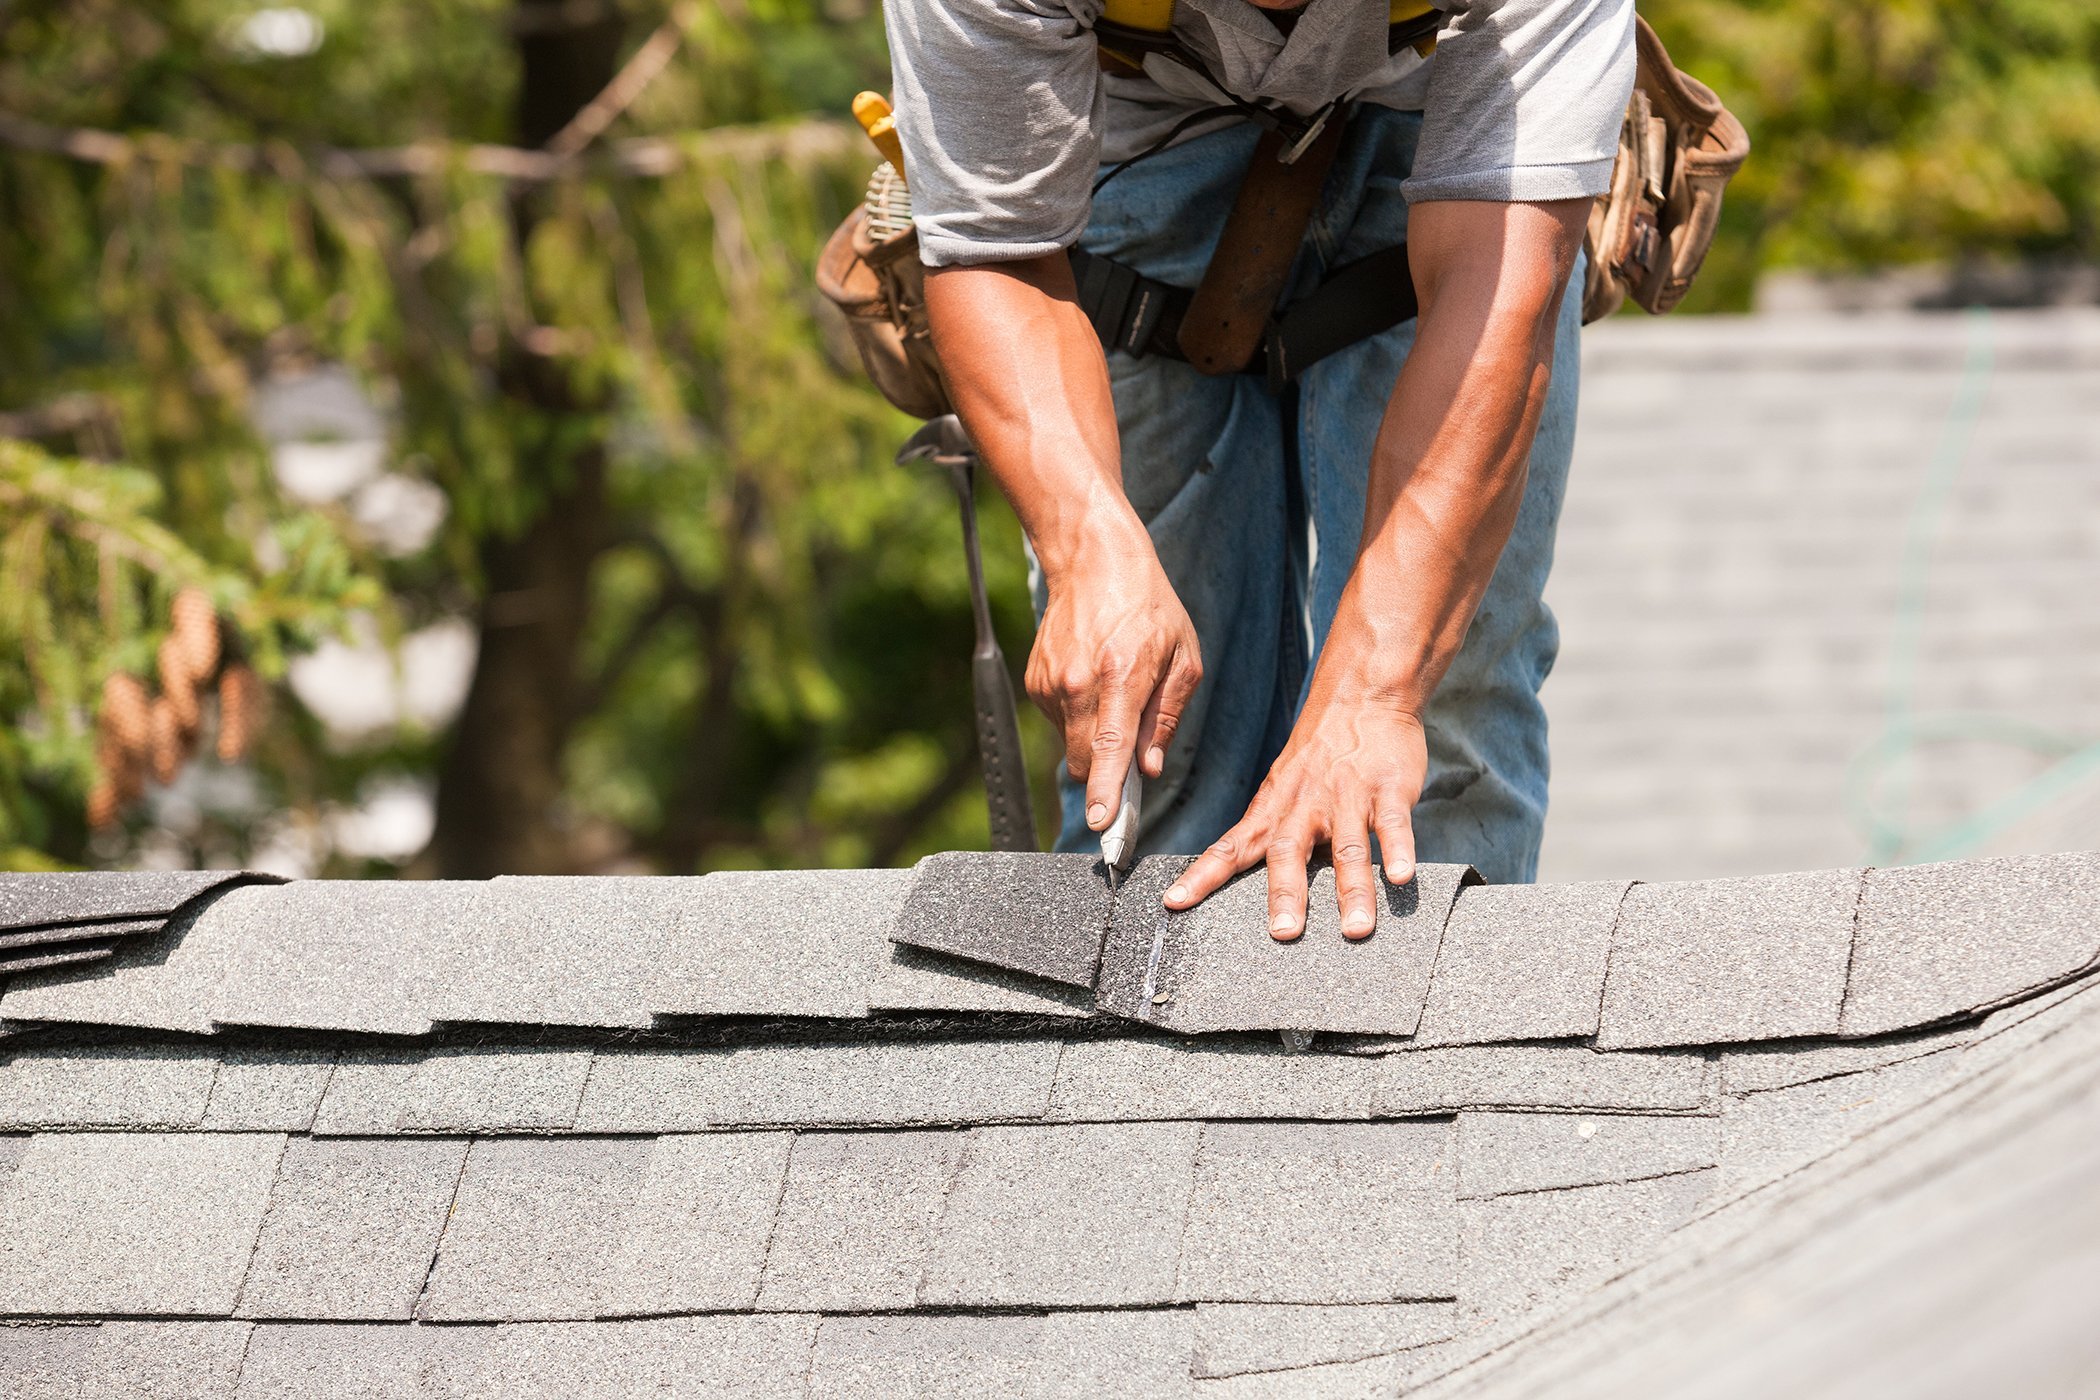 Roof Replacement Contractor Roofing Company Near Me South Florida